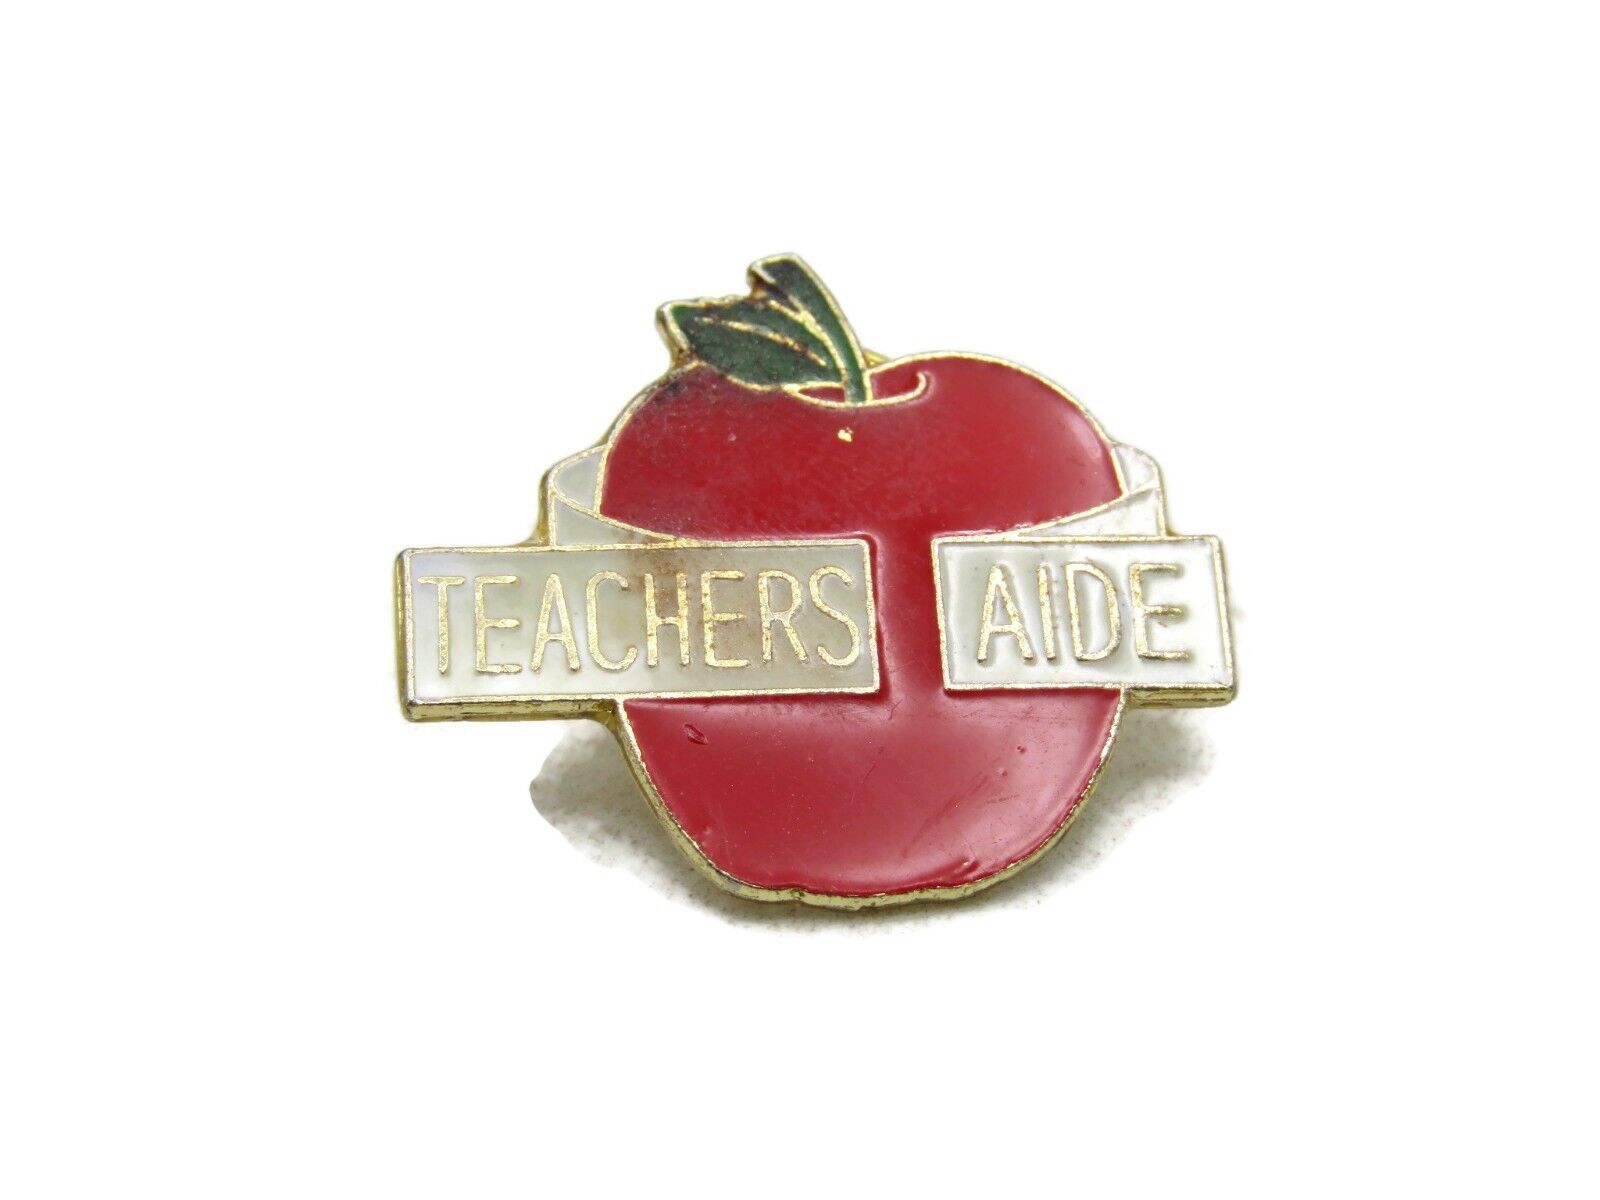 Vintage Teachers Aide Lettered Red Apple Pin Gold Tone